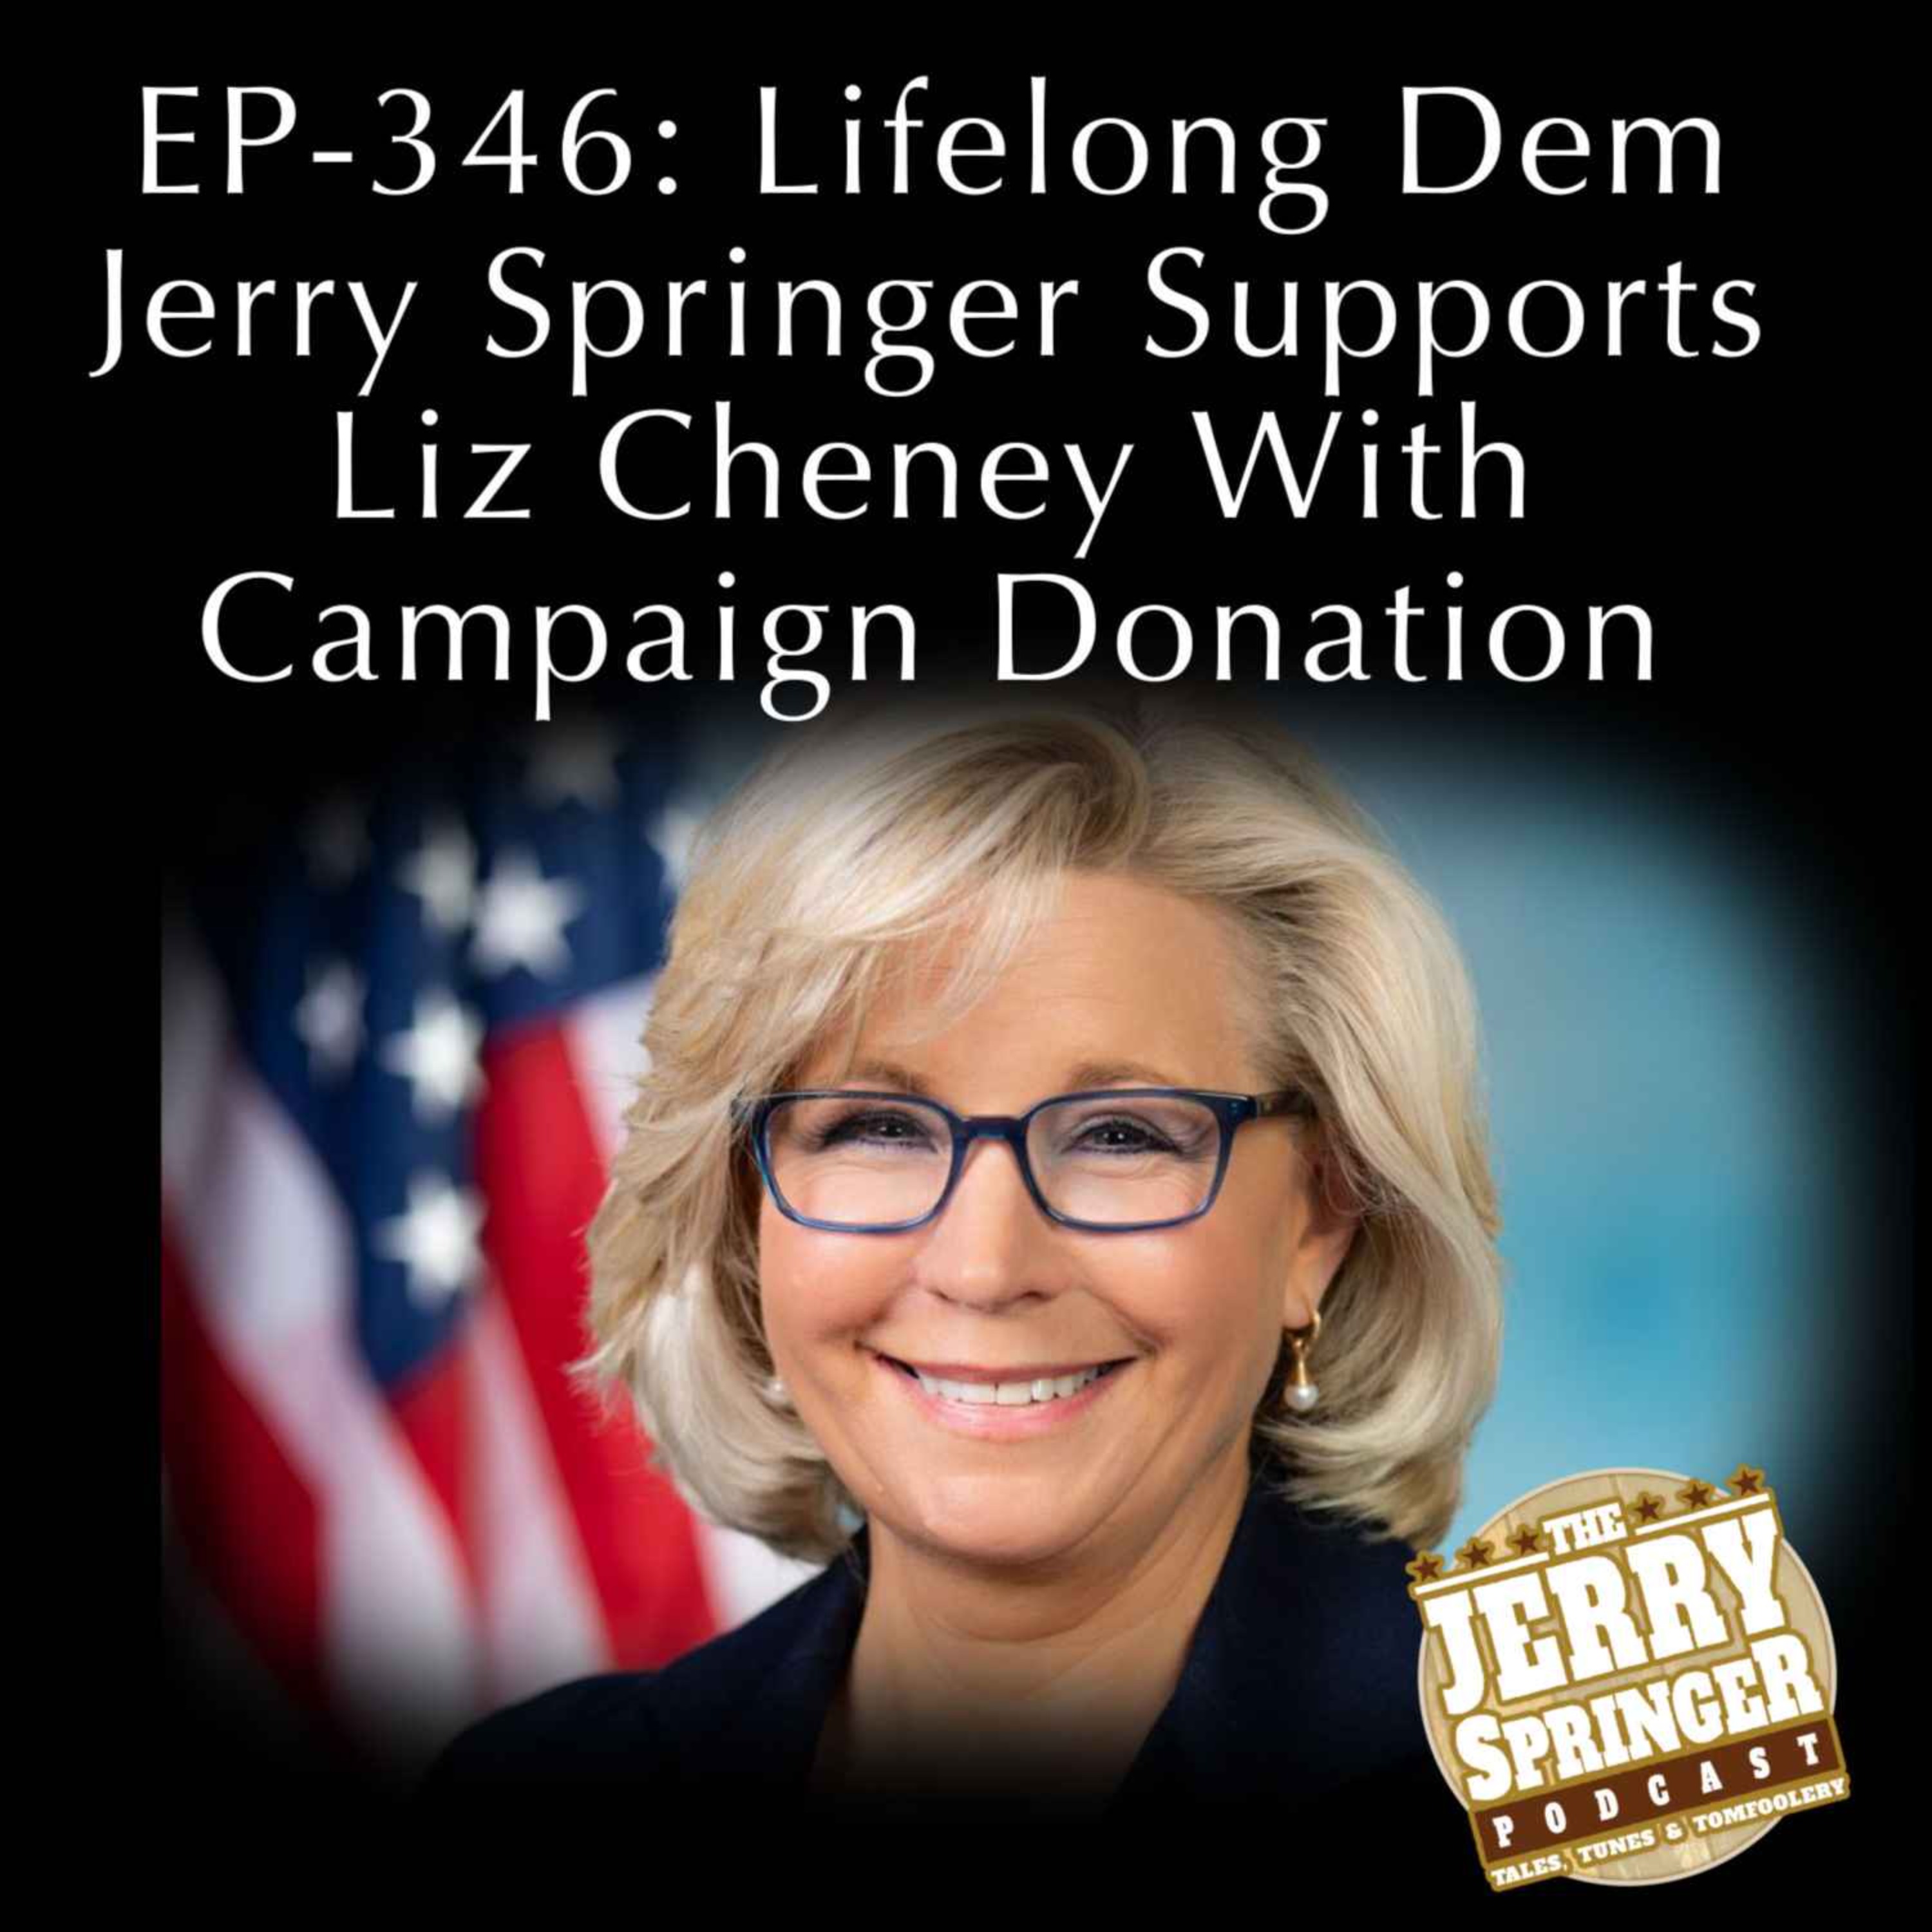 Lifelong Dem Jerry Springer Supports Liz Cheney With Campaign Donation: EP - 346